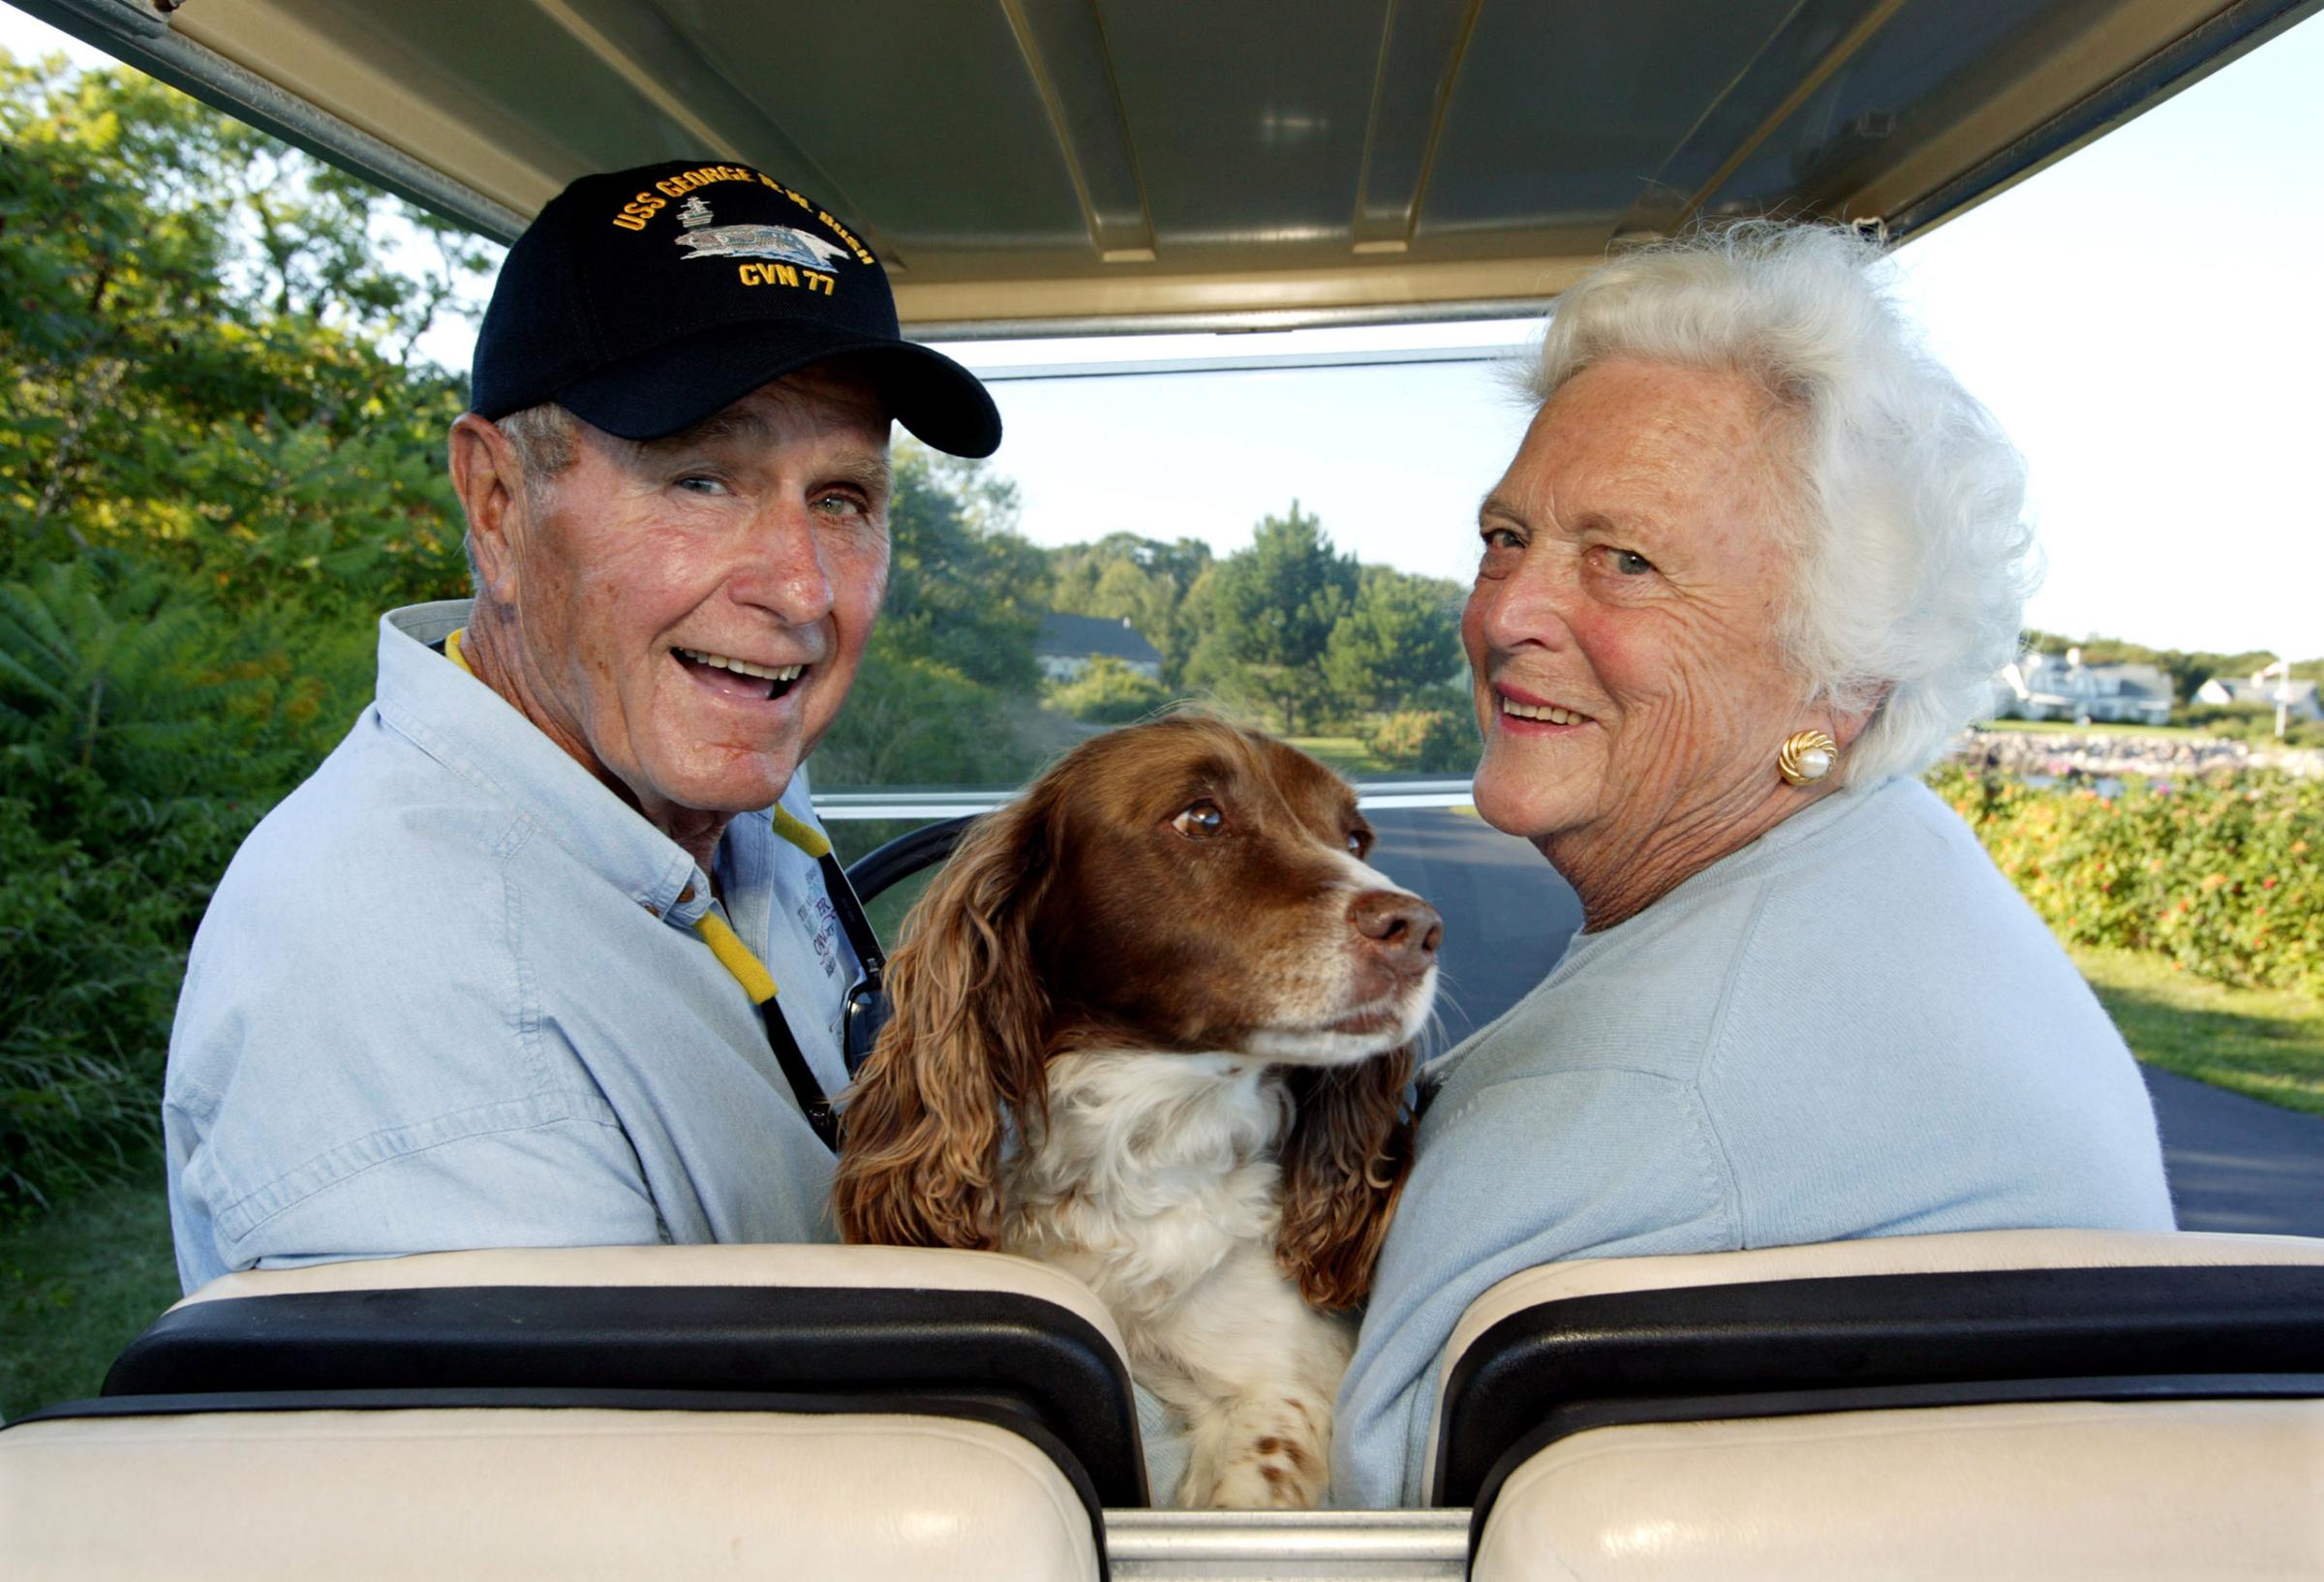 Former U.S. president George H. W. Bush and wife, Barbara Bush, cruise in the back of a golf cart with their dog Millie at their home at Walker's Point on Aug. 25, 2004 in Kennebunkport, ME.